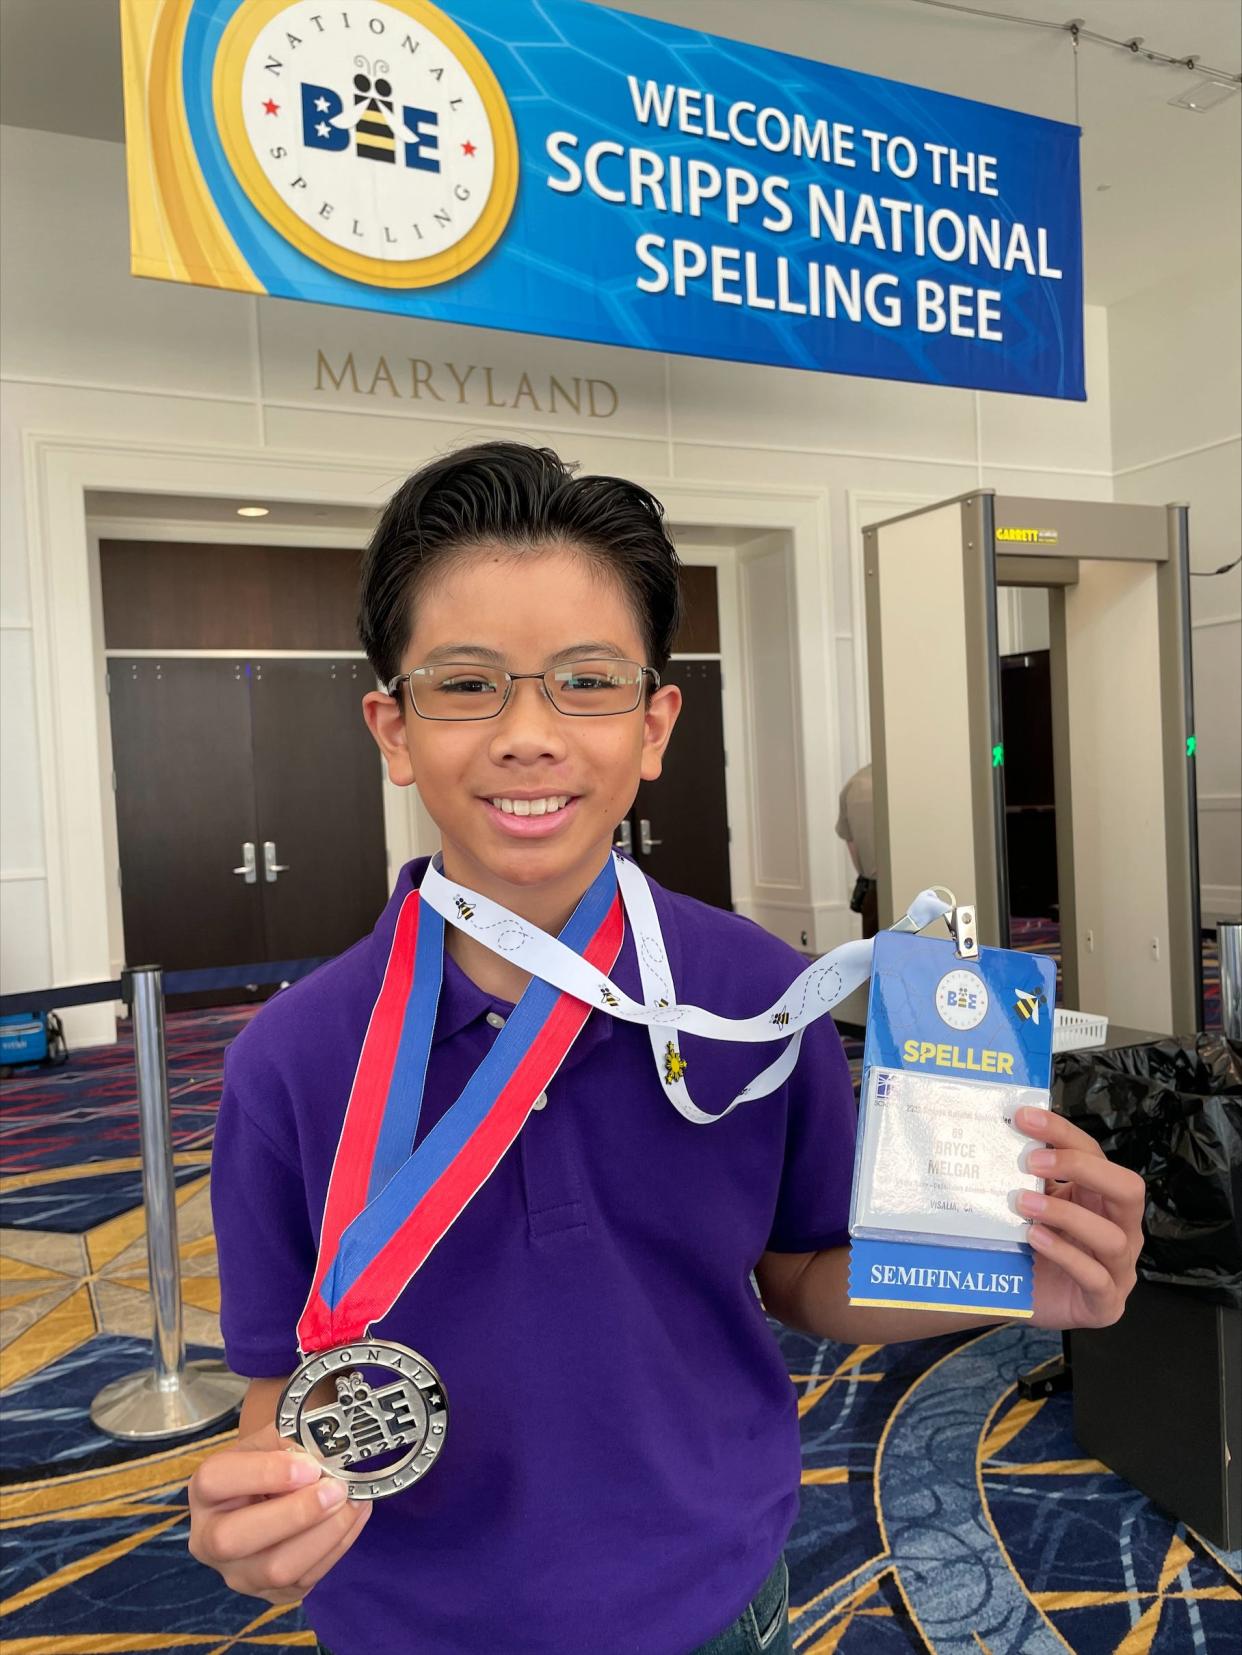 Bryce Melgar, the Ridgeview Middle School spelling champion, made it through the quarterfinal round and into the Scripps National Spelling Bee semifinals Tuesday.